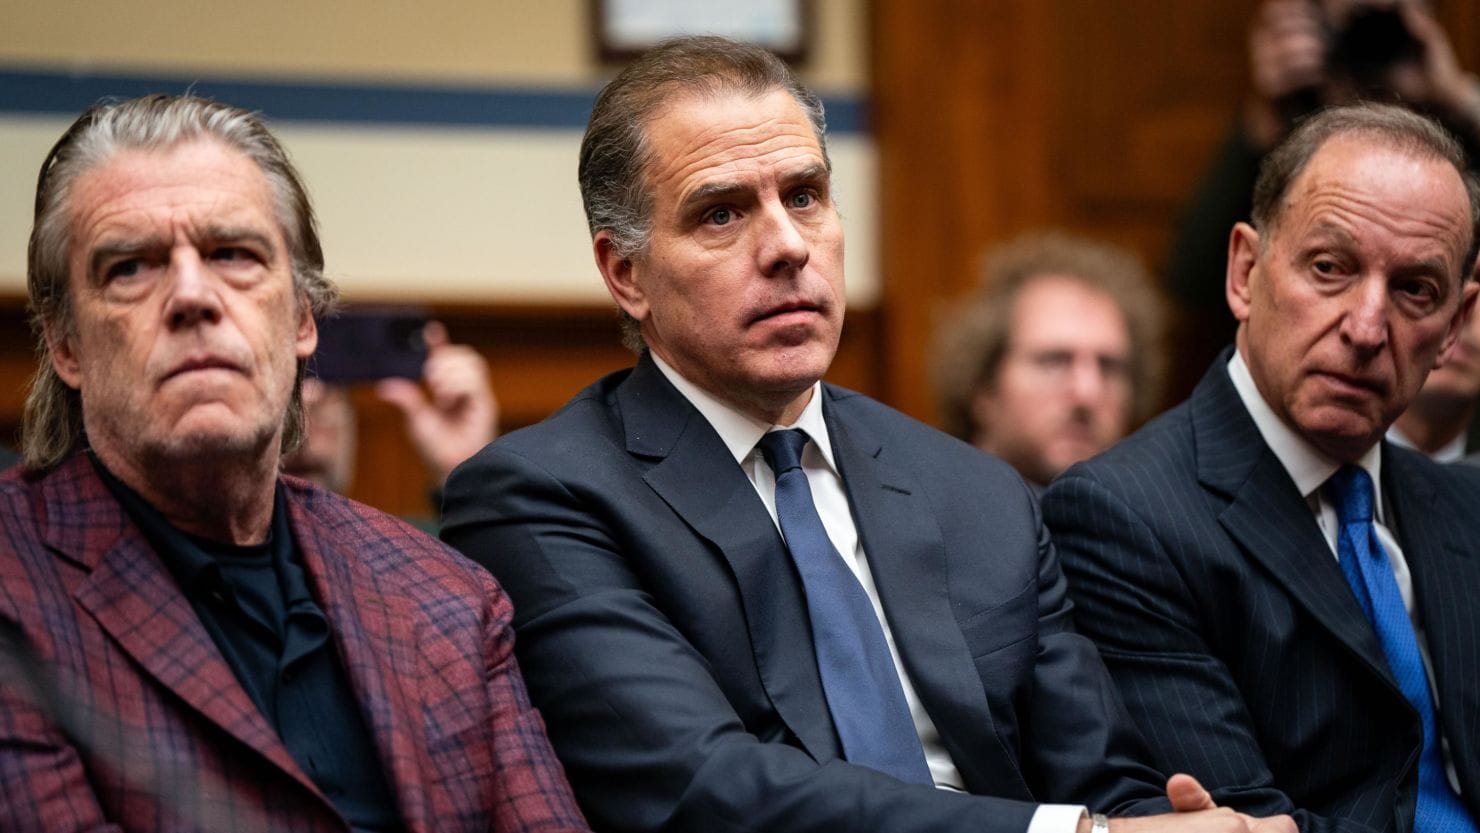 BREAKING: Hunter Biden Convicted on Federal Gun Charges